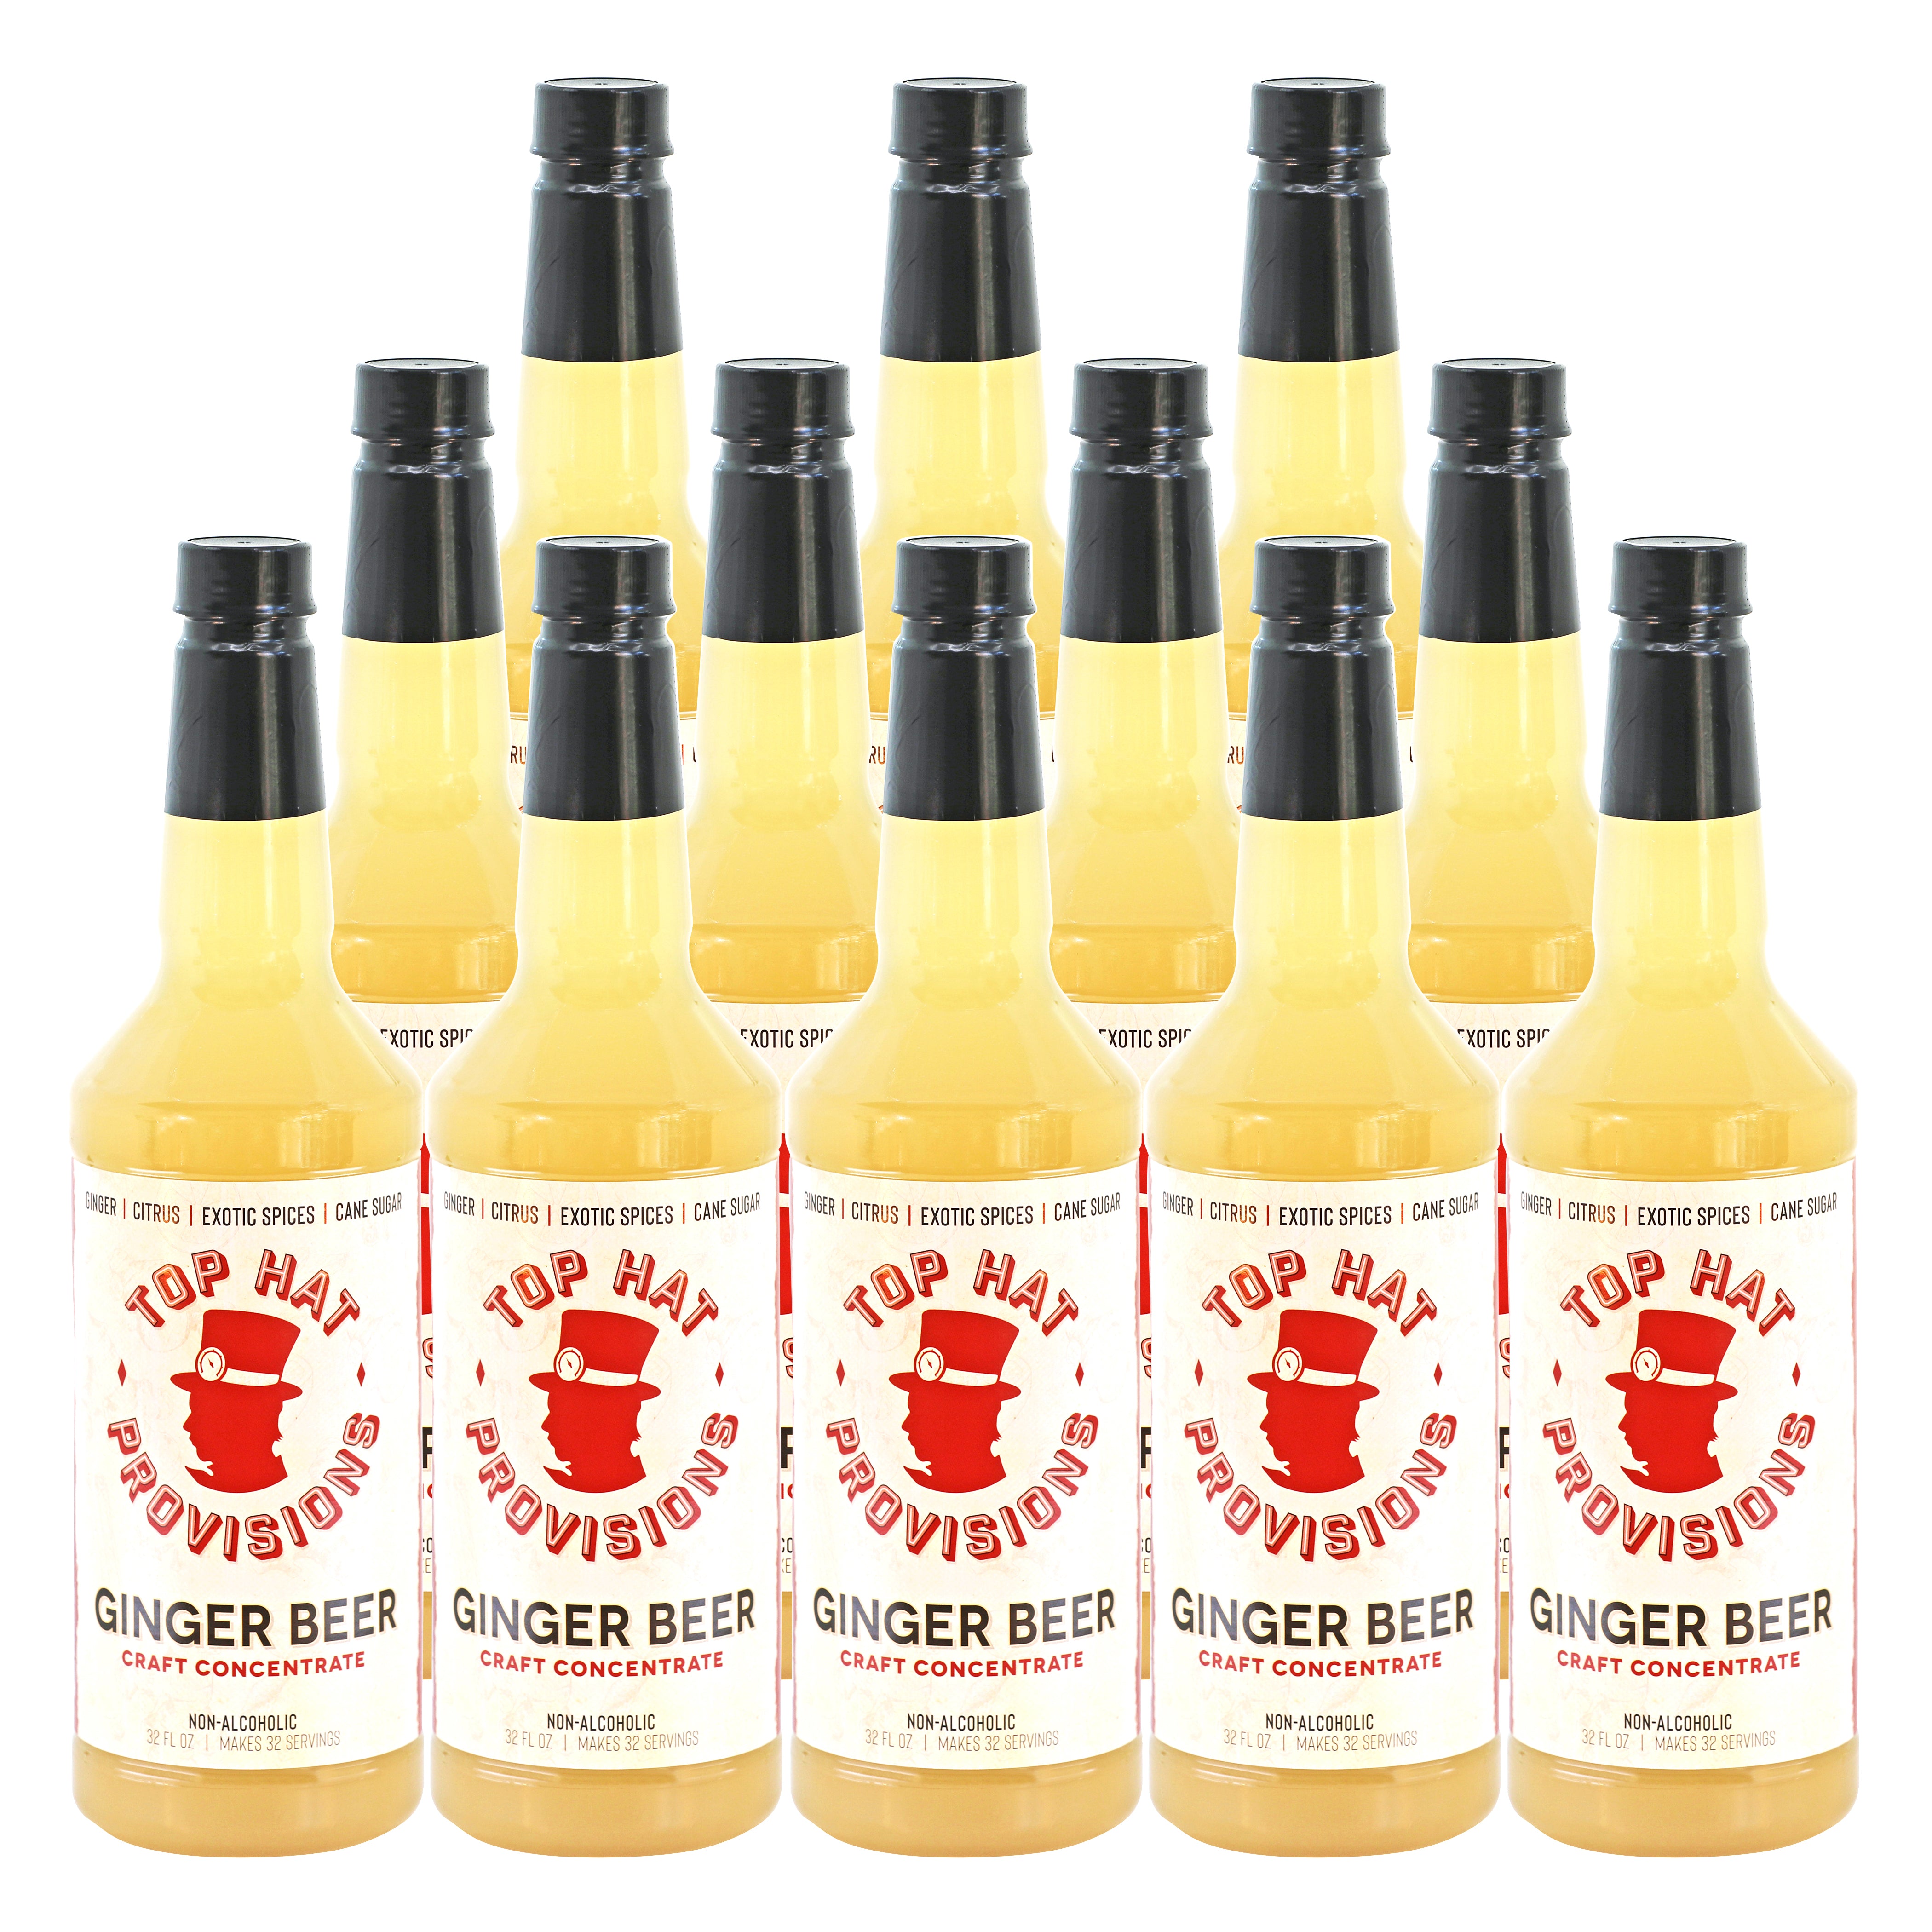 Top Hat Original Ginger Beer Syrup & Moscow Mule Batching Mix - 32oz Bottle